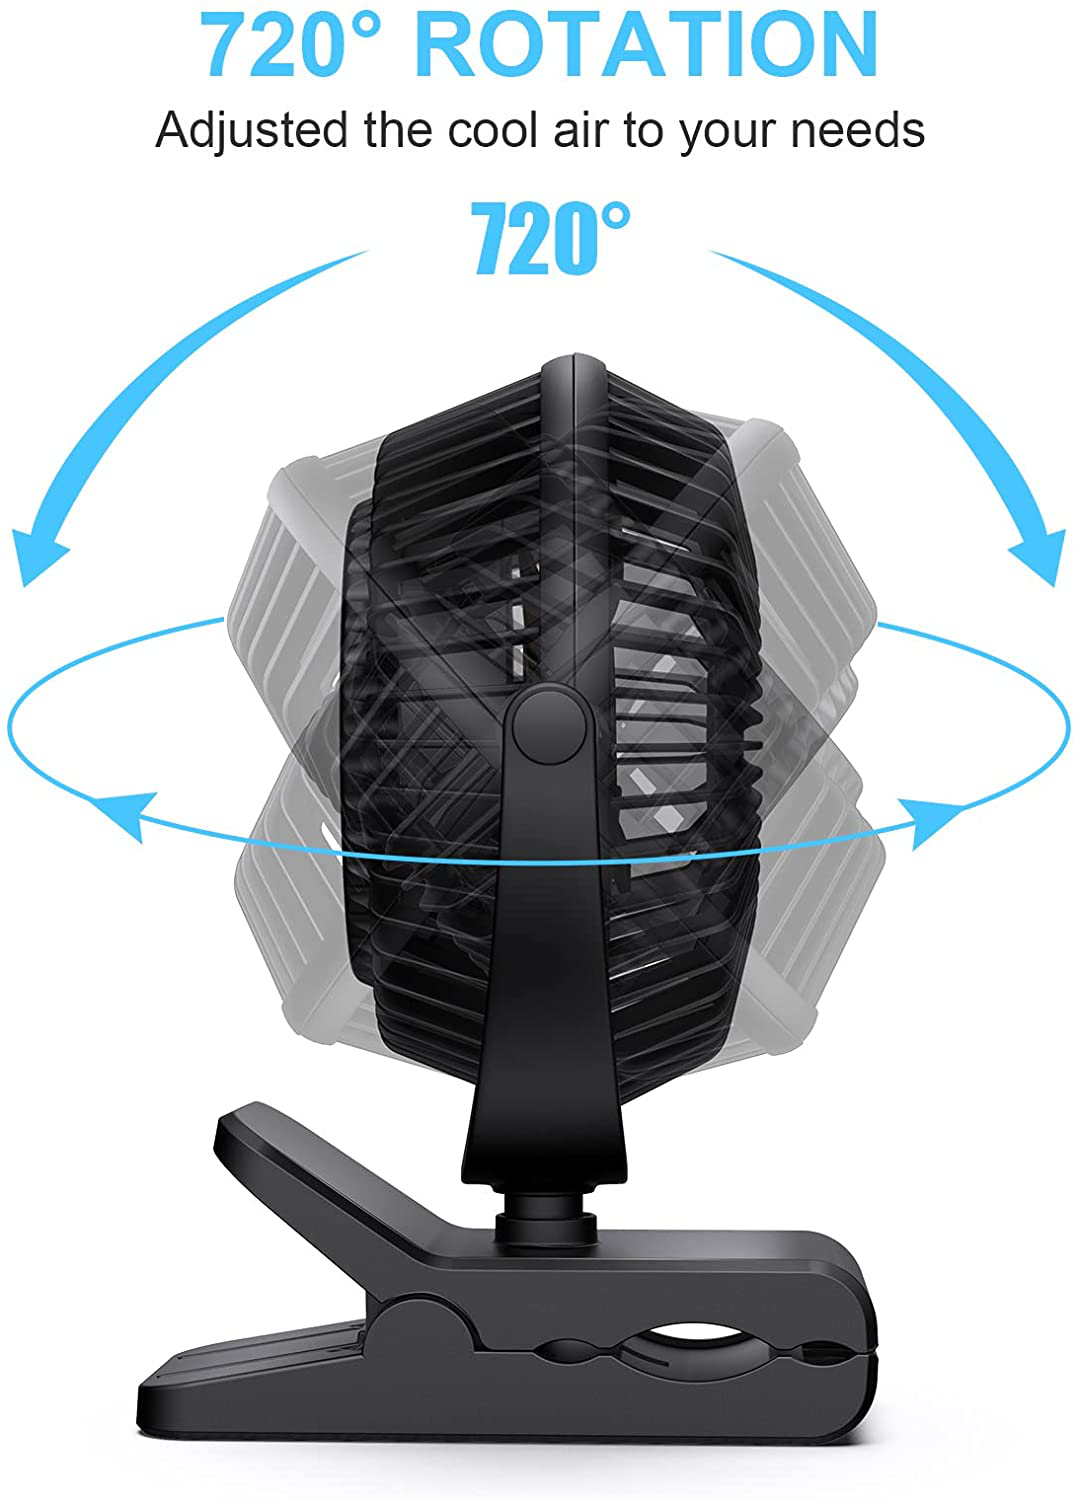 Portable Clip on Fan, 6 Inch Small Fan with USB Cord Powered, Personal Cooling Fan with 3 Speeds, Sturdy Clamp, Quiet Electric Fan for Office Bedroom Desktop, Clip Hang Desk Fan 3 in 1- No Battery Animals & Pet Supplies > Pet Supplies > Dog Supplies > Dog Treadmills HONYIN   